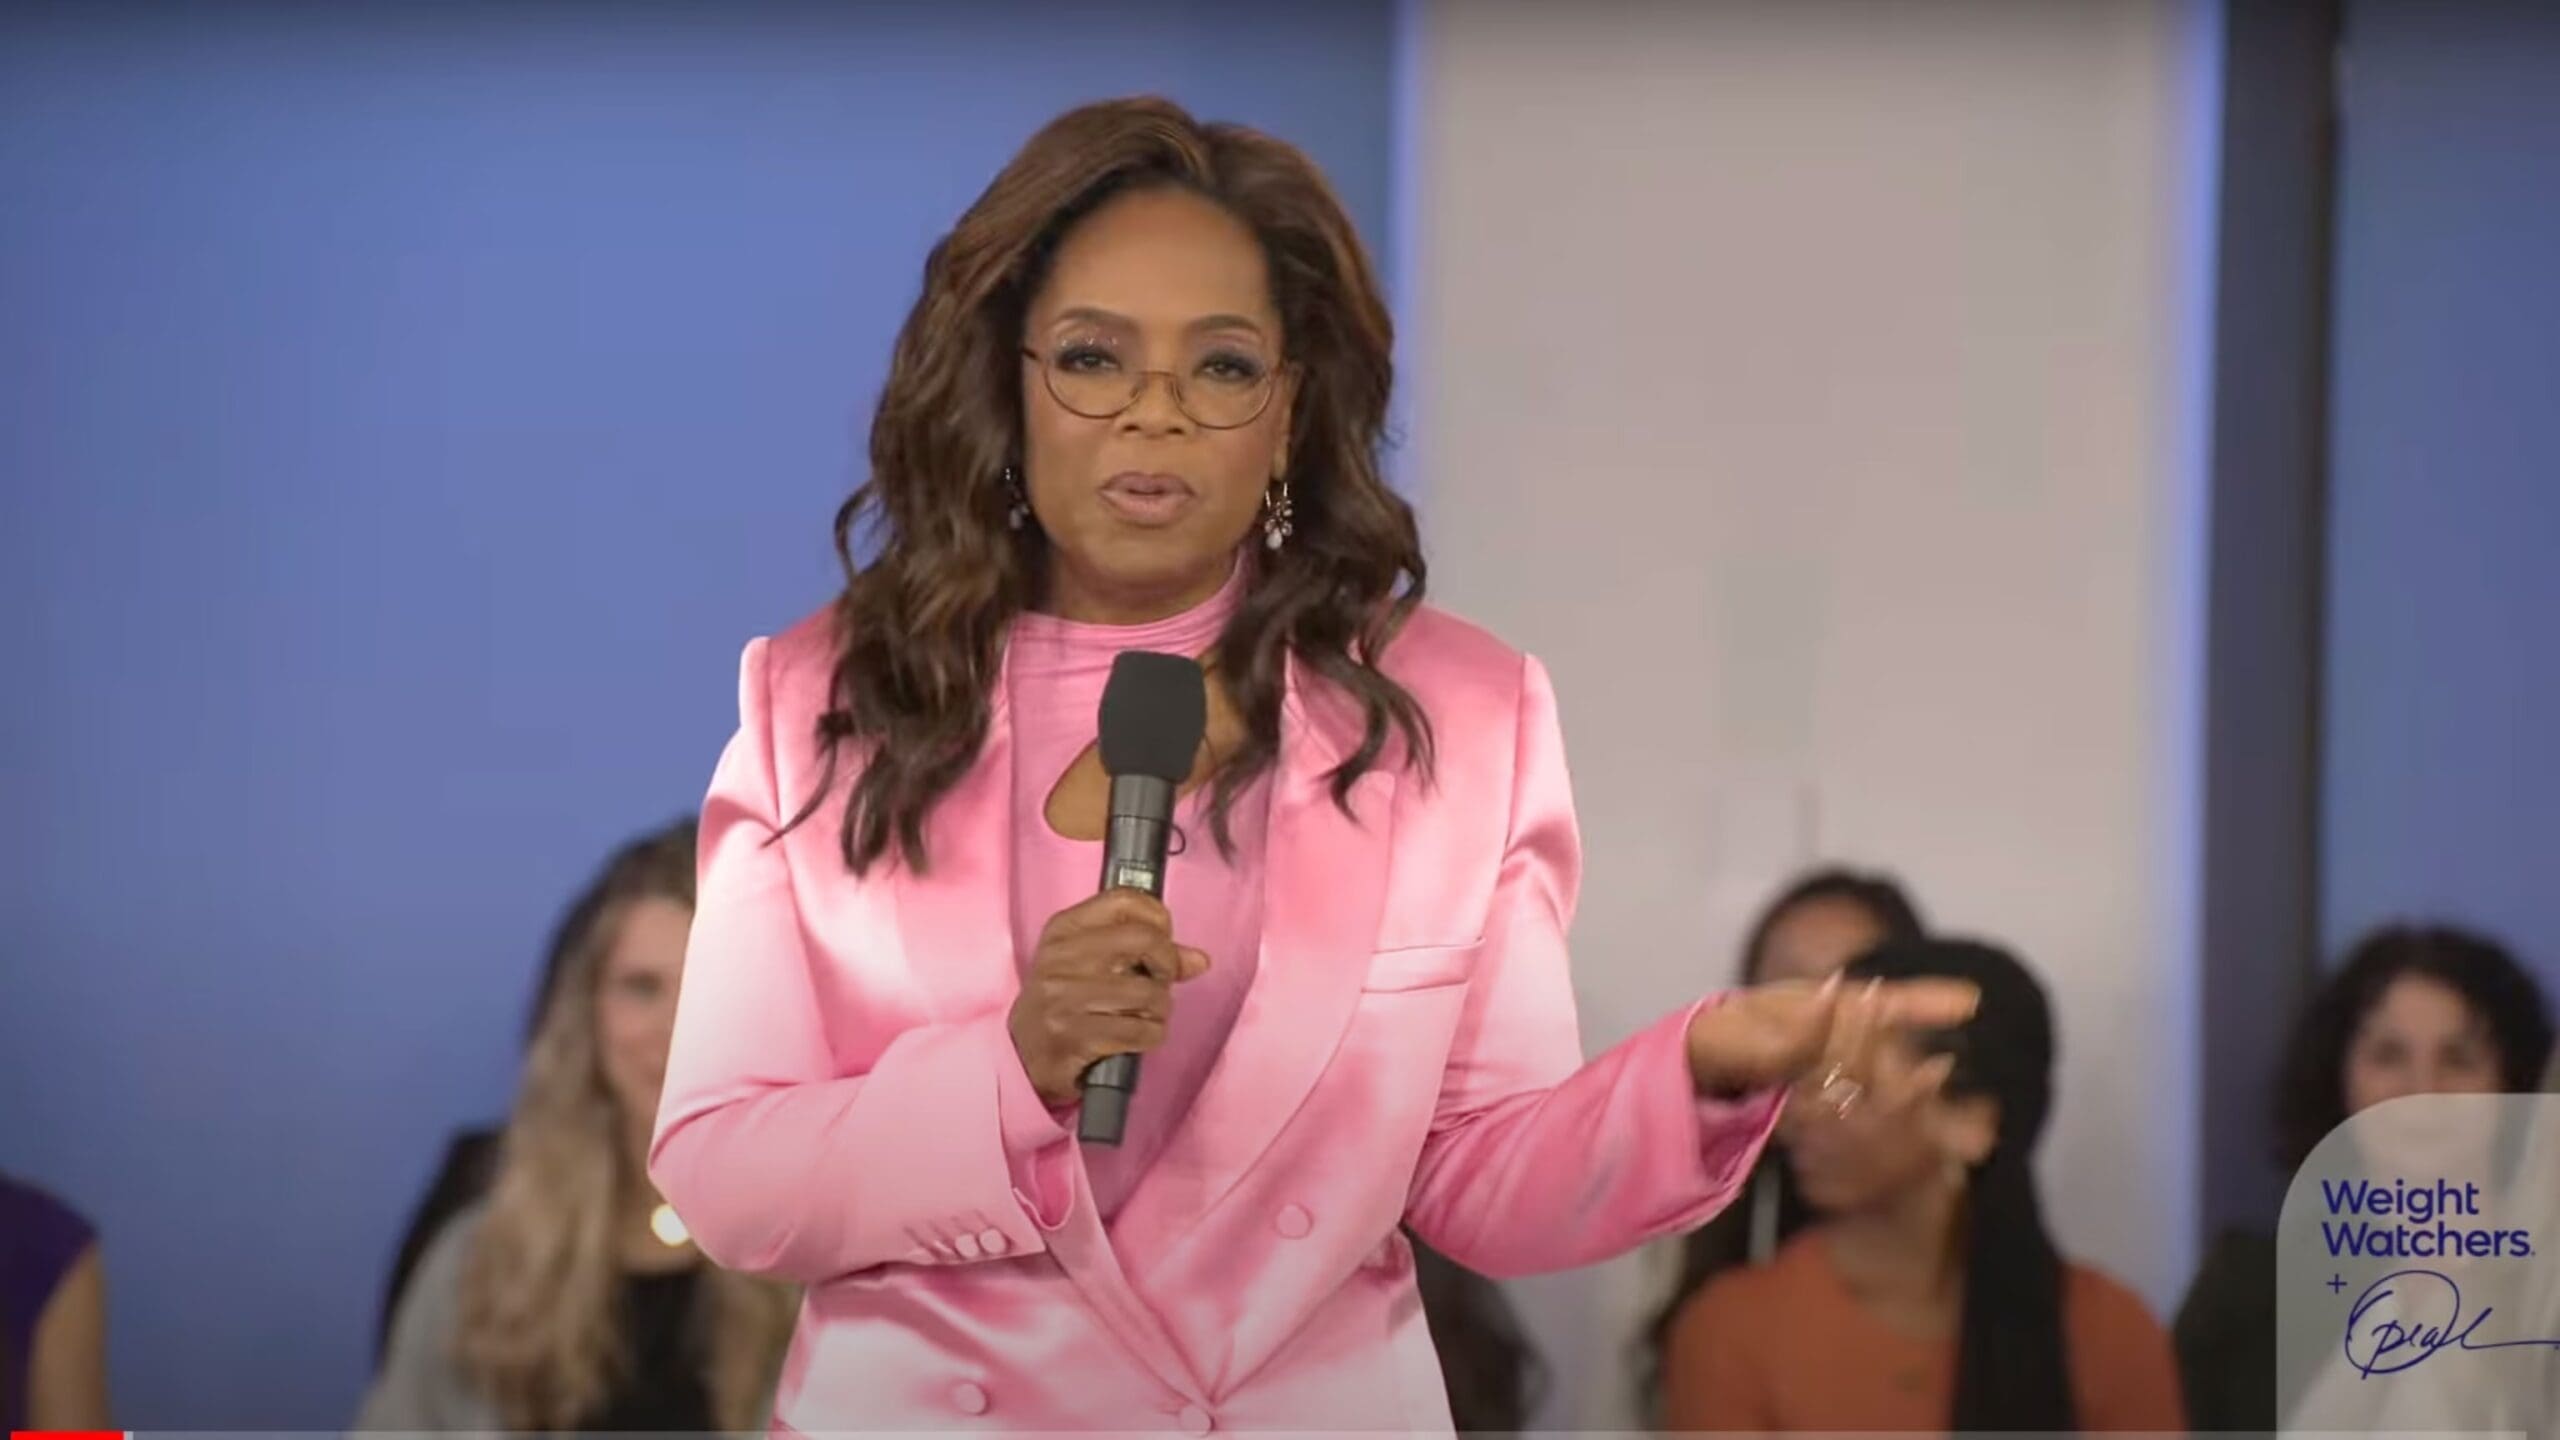 Oprah Winfrey Apologizes for Being ‘Major Contributor’ to Diet Culture